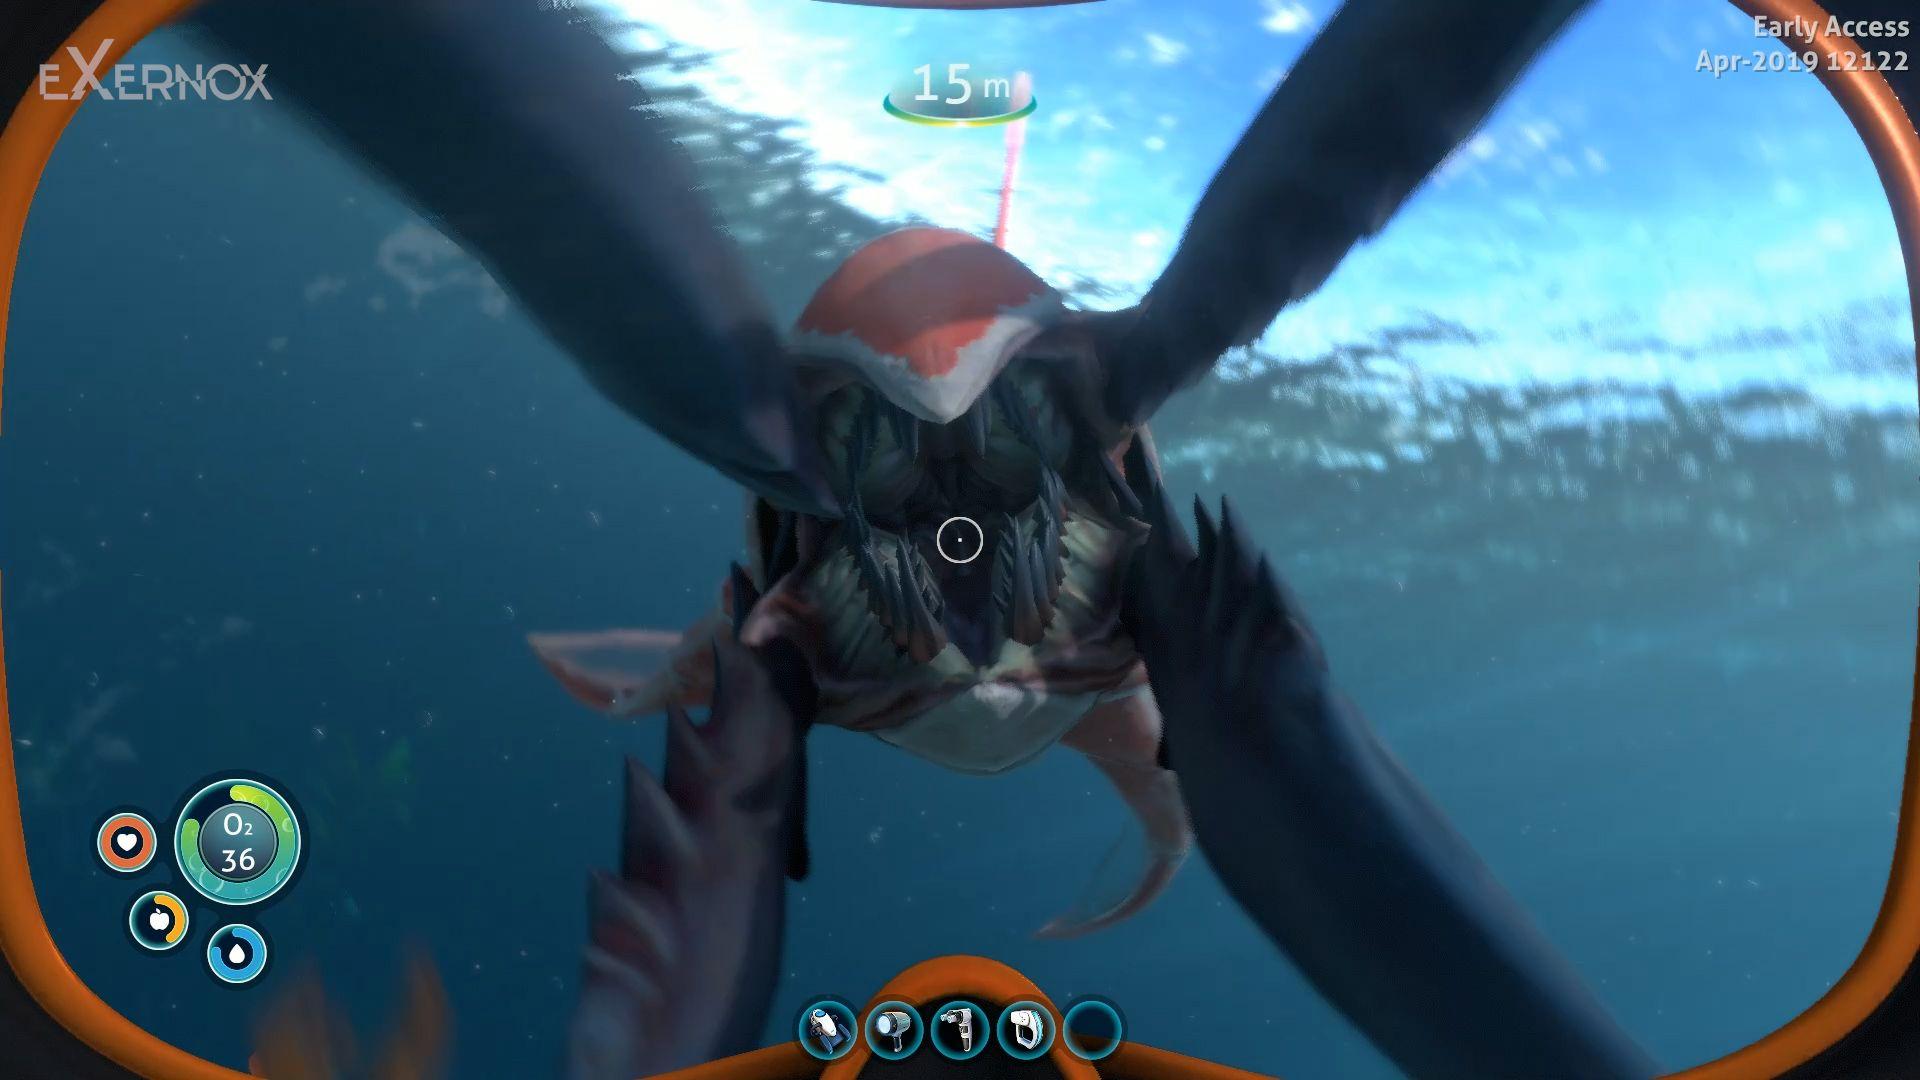 how to get subnautica free